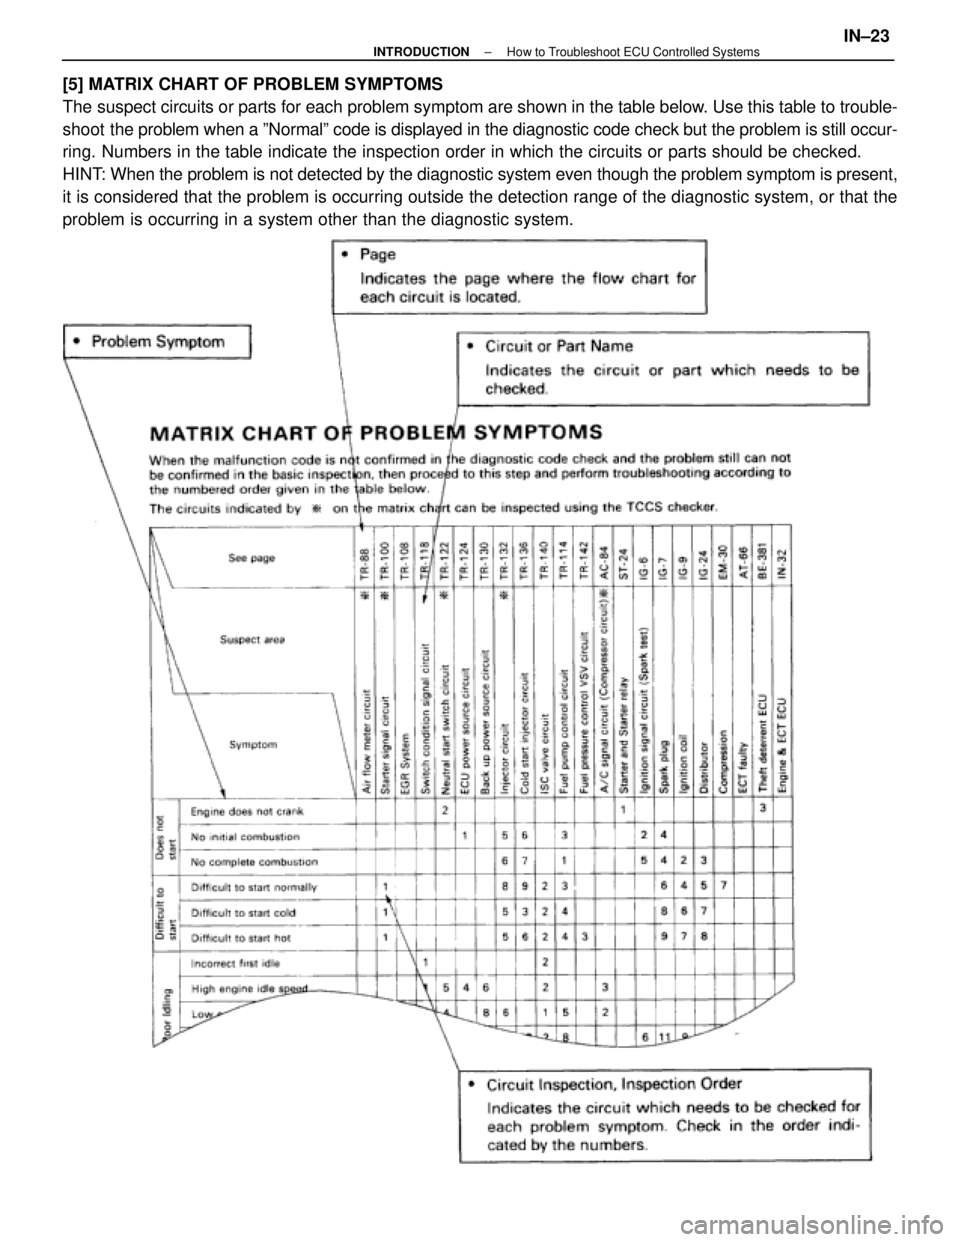 LEXUS SC300 1991  Service Repair Manual 
[5] MATRIX CHART OF PROBLEM SYMPTOMS
The suspect circuits or parts for each problem symptom are shown in the tab\
le below. Use this table to trouble-
shoot the problem when a ºNormalº code is disp